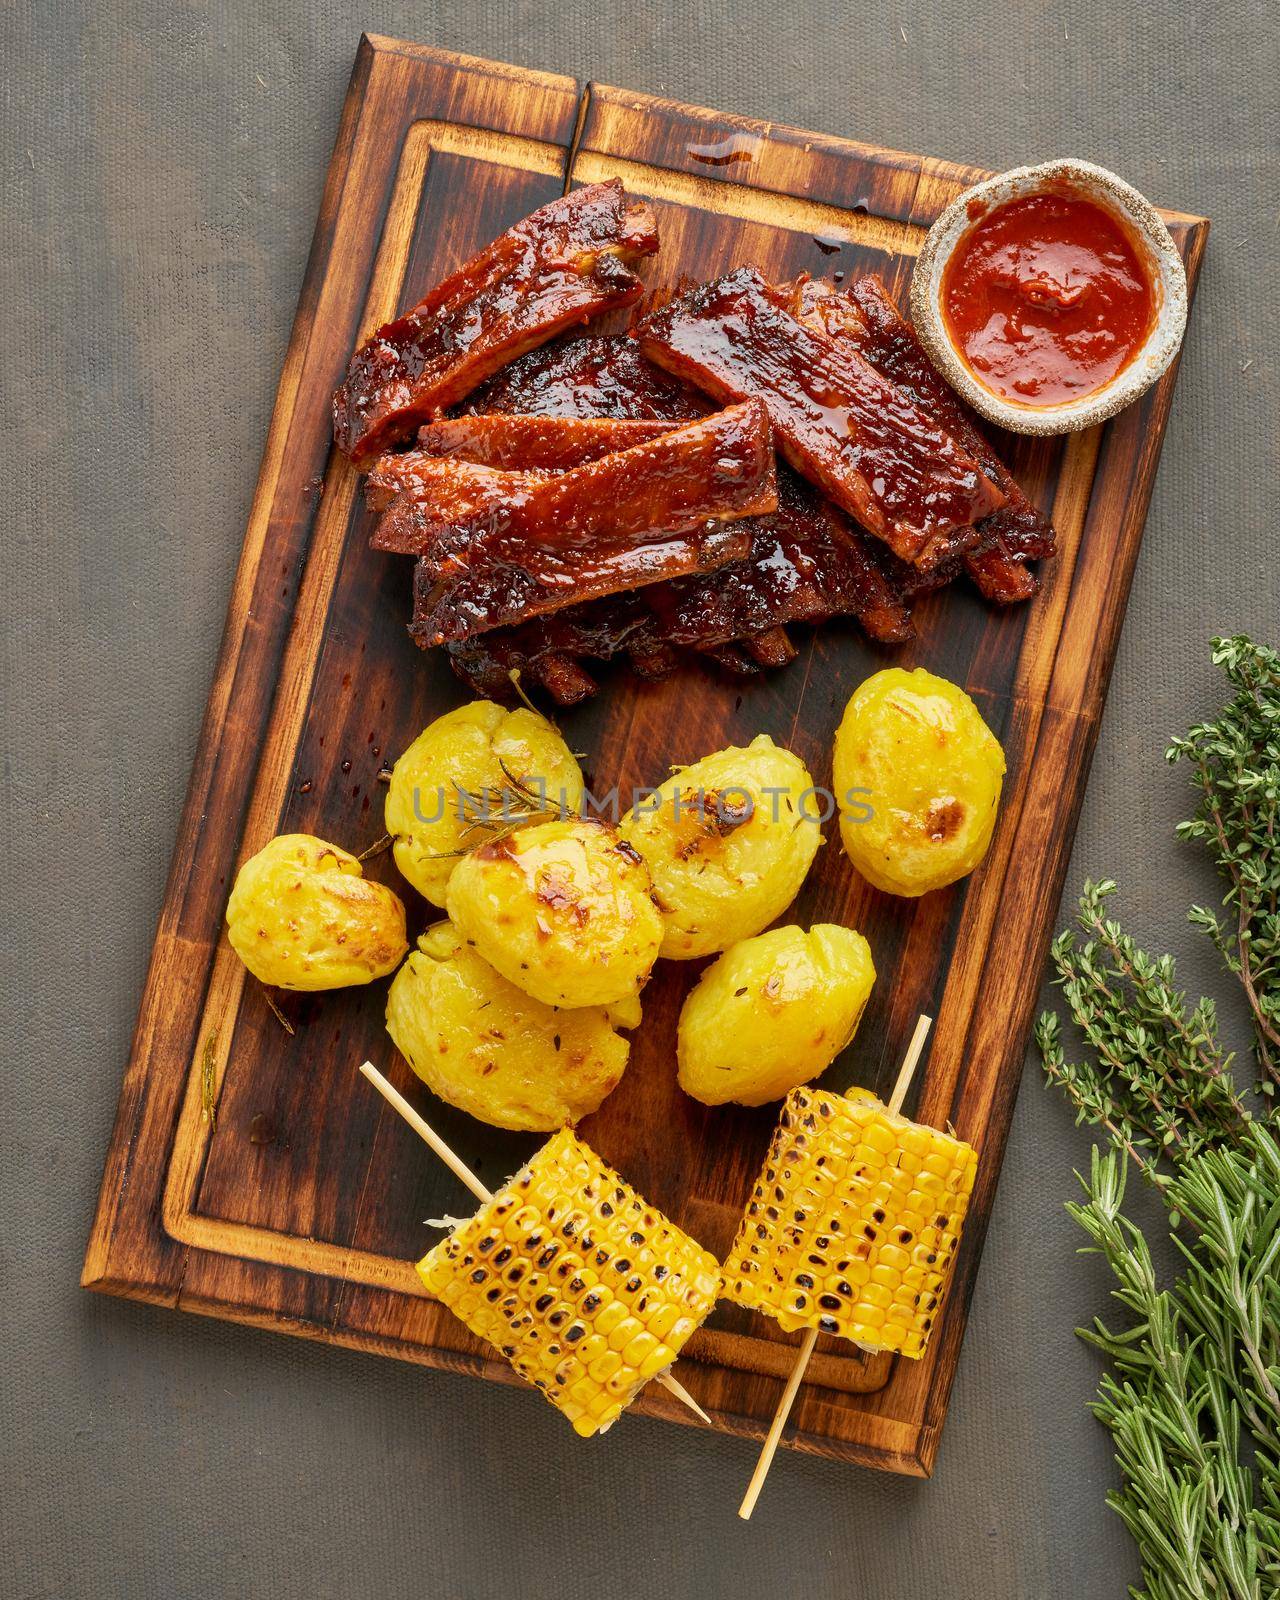 Spicy barbecue pork ribs, corn ears and crushed smashed potatoes. Slow cooking recipe. Pickled Roasted Pork Meat with red sauce. American Cuisine. Vertical